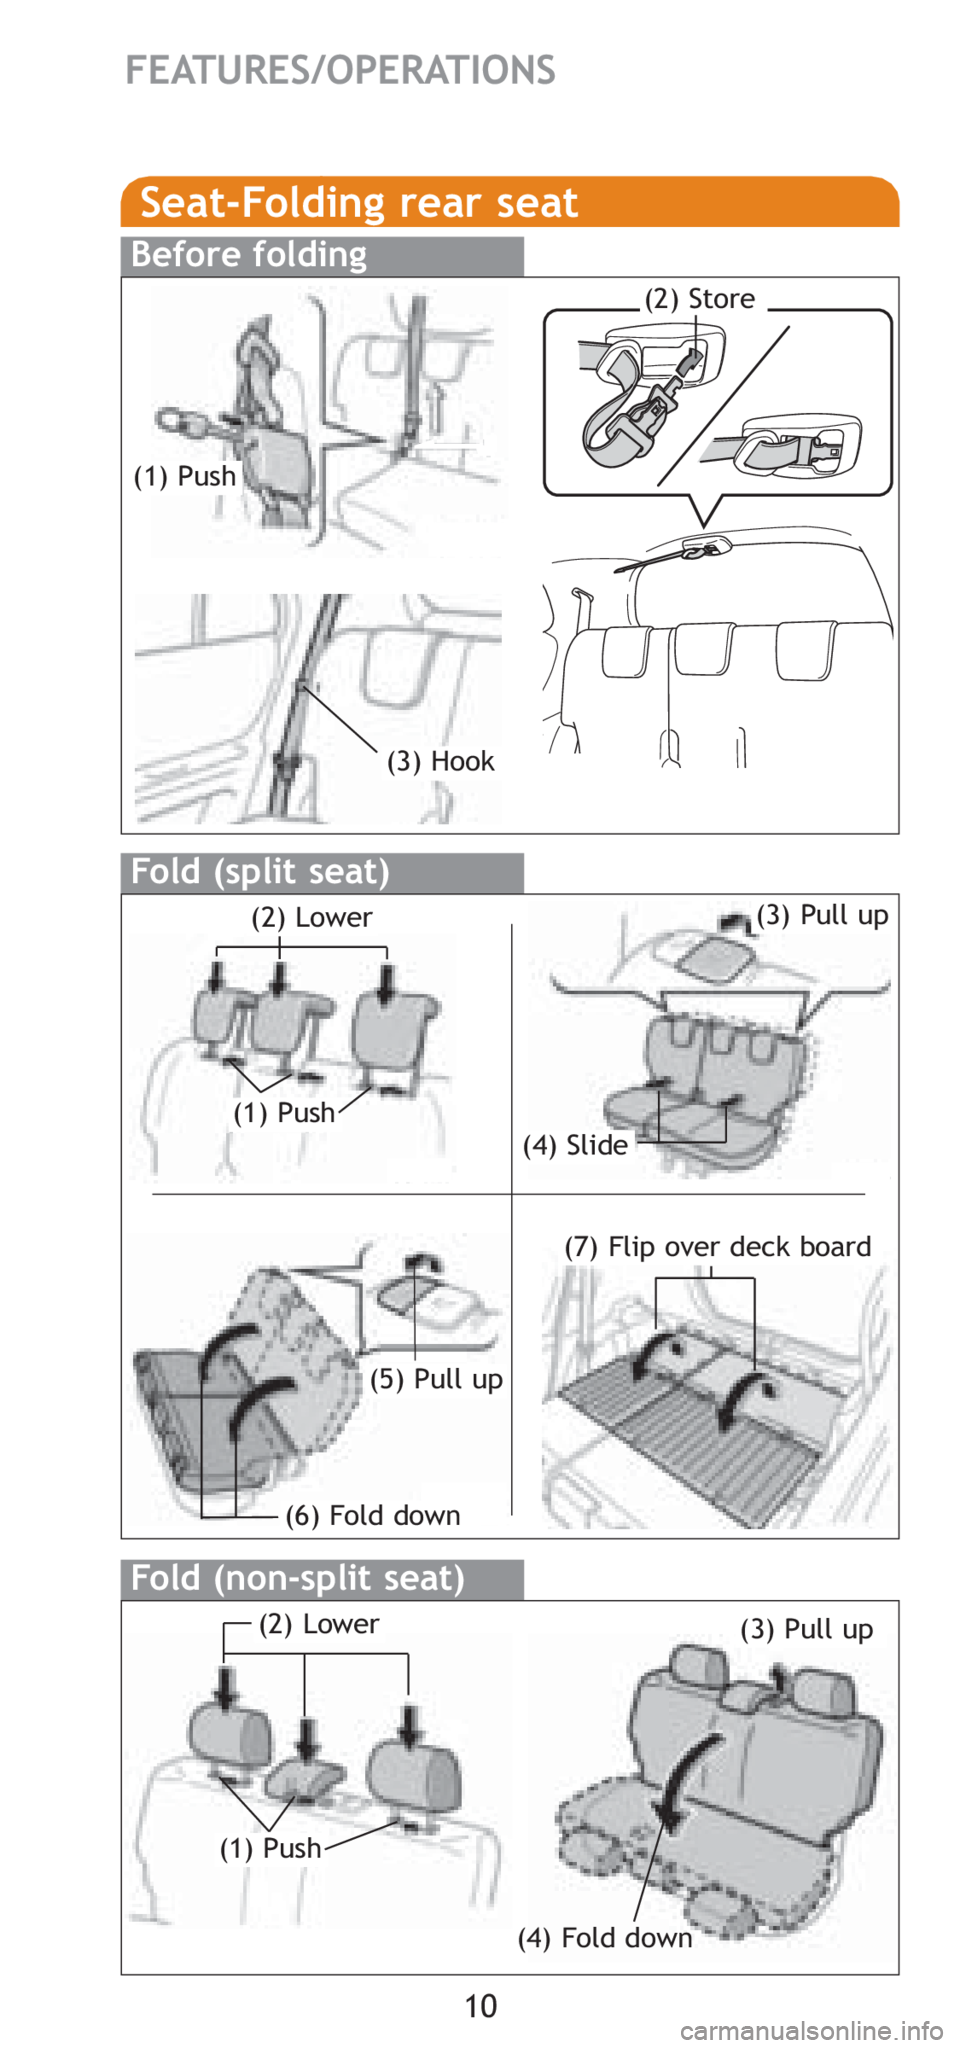 TOYOTA YARIS HATCHBACK 2008 User Guide 10
FEATURES/OPERATIONS
Seat-Folding rear seat
Before folding
(1) Push
(3) Hook
(2) Store
Fold (split seat)
(1) Push
(3) Pull up(2) Lower
(4) Slide
(5) Pull up
(7) Flip over deck board
Fold (non-split 